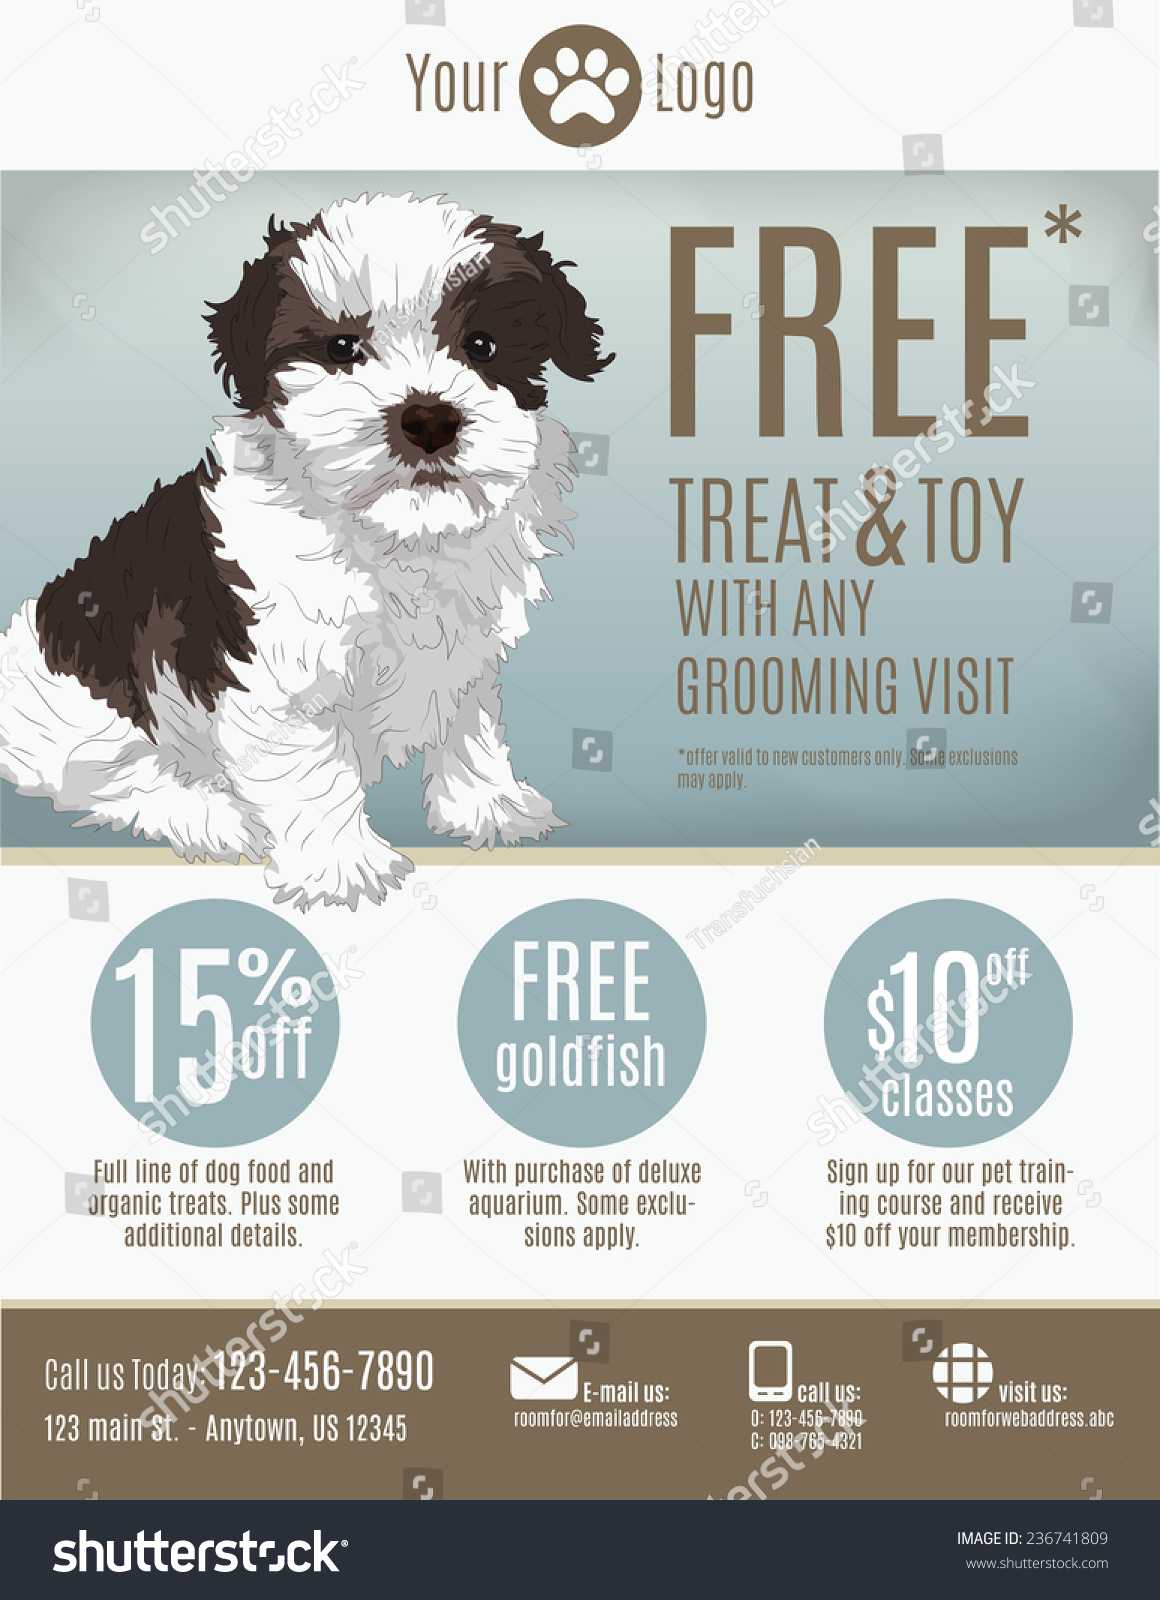 Flyer Template Pet Store Groomer Discount Stock Vector Pertaining To Dog Grooming Flyers Template